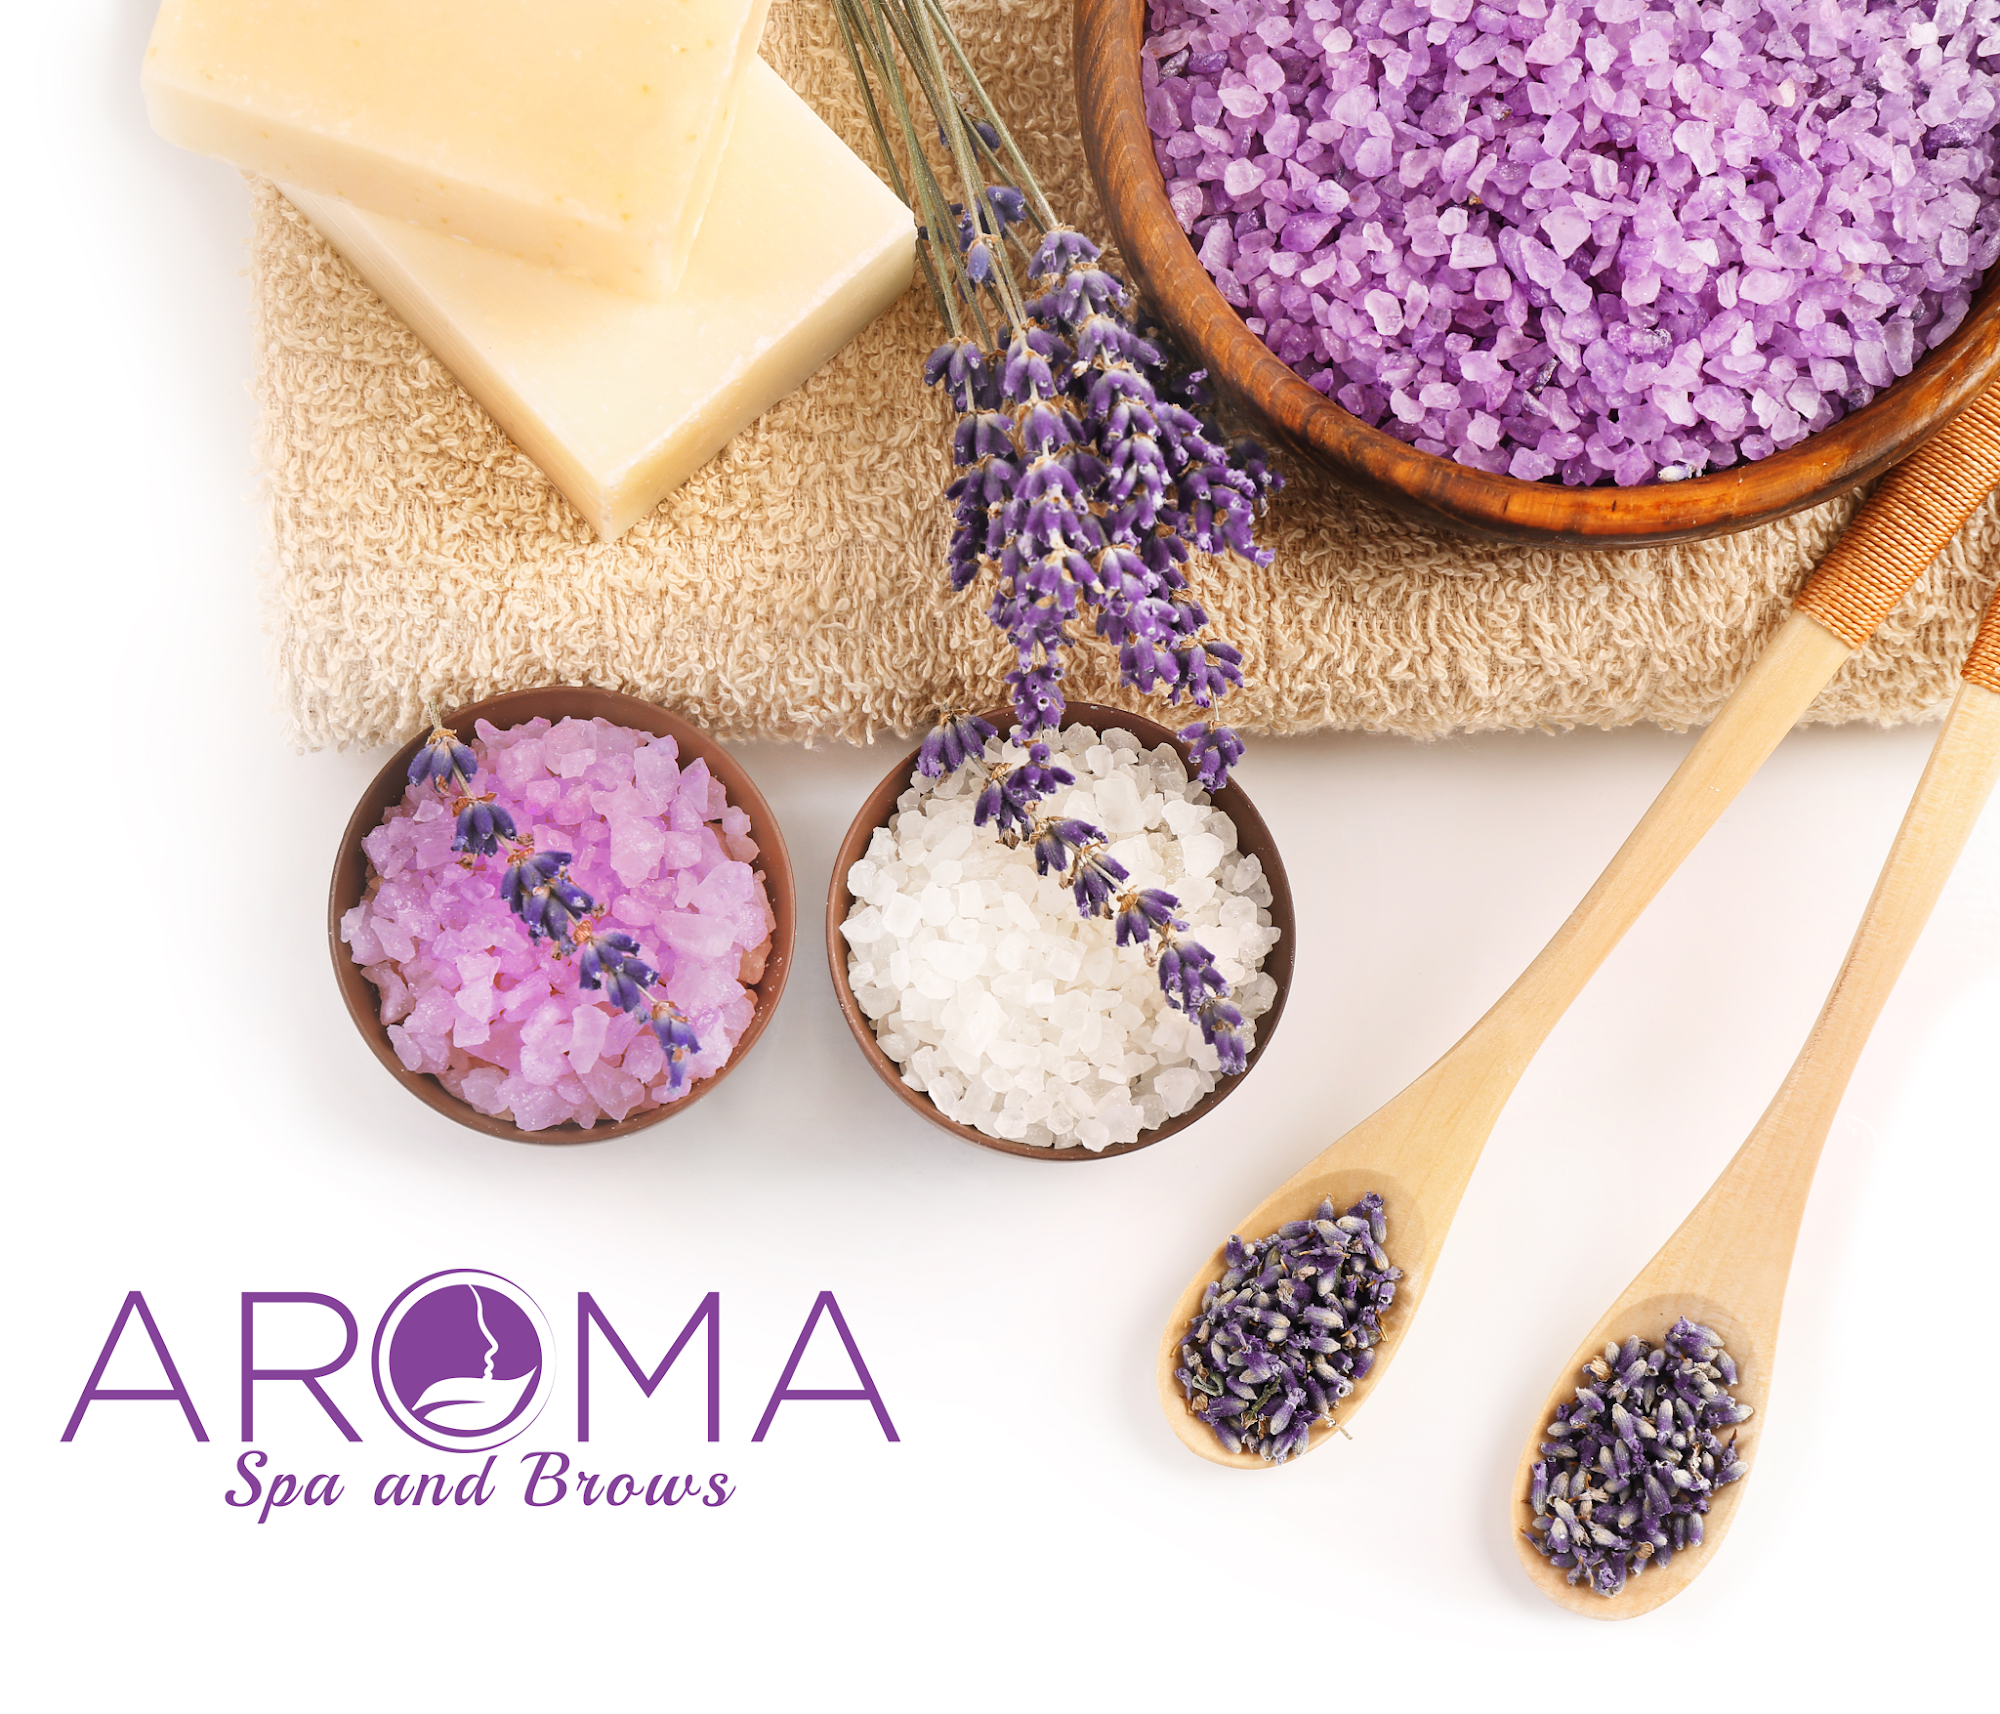 Aroma Spa and Brows